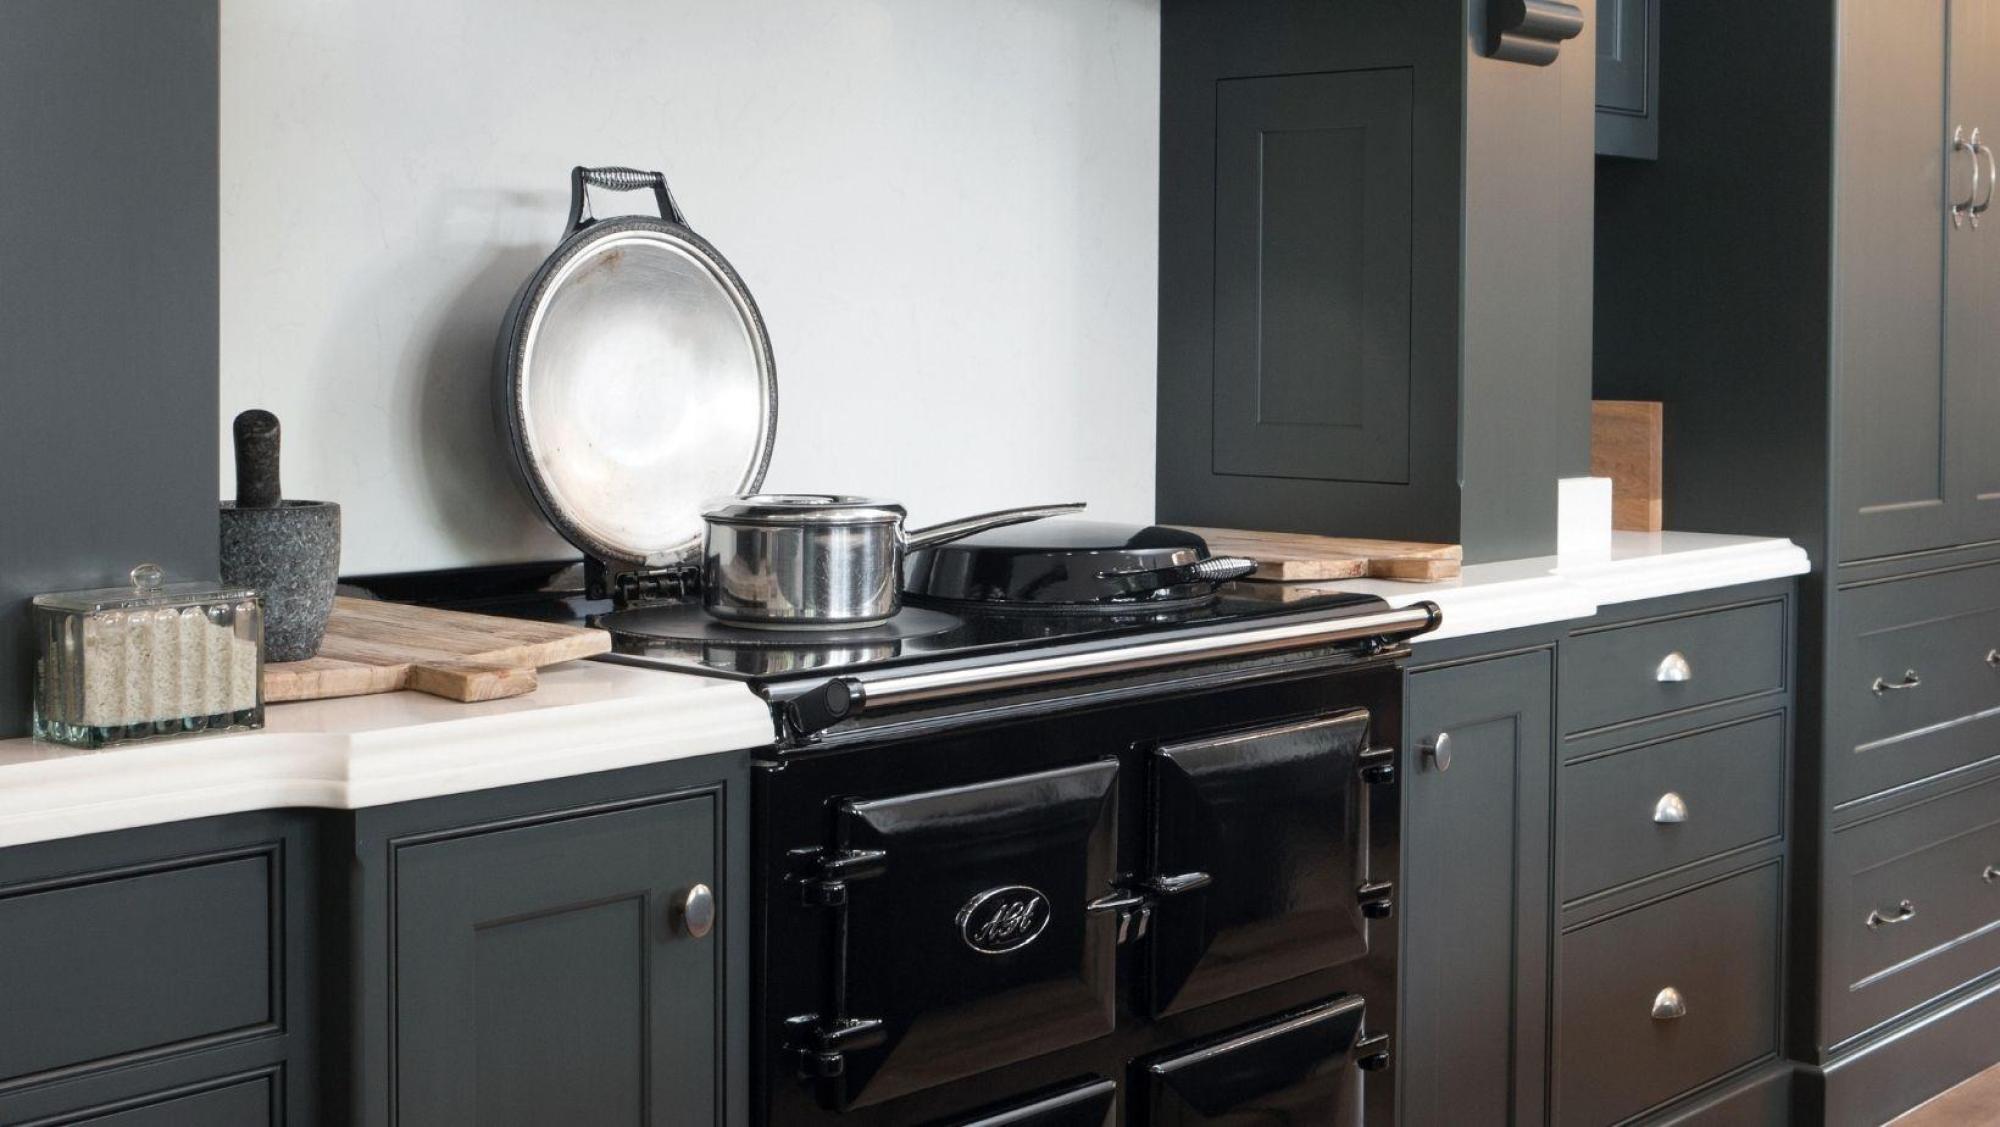 AGA Cookery Demonstrations